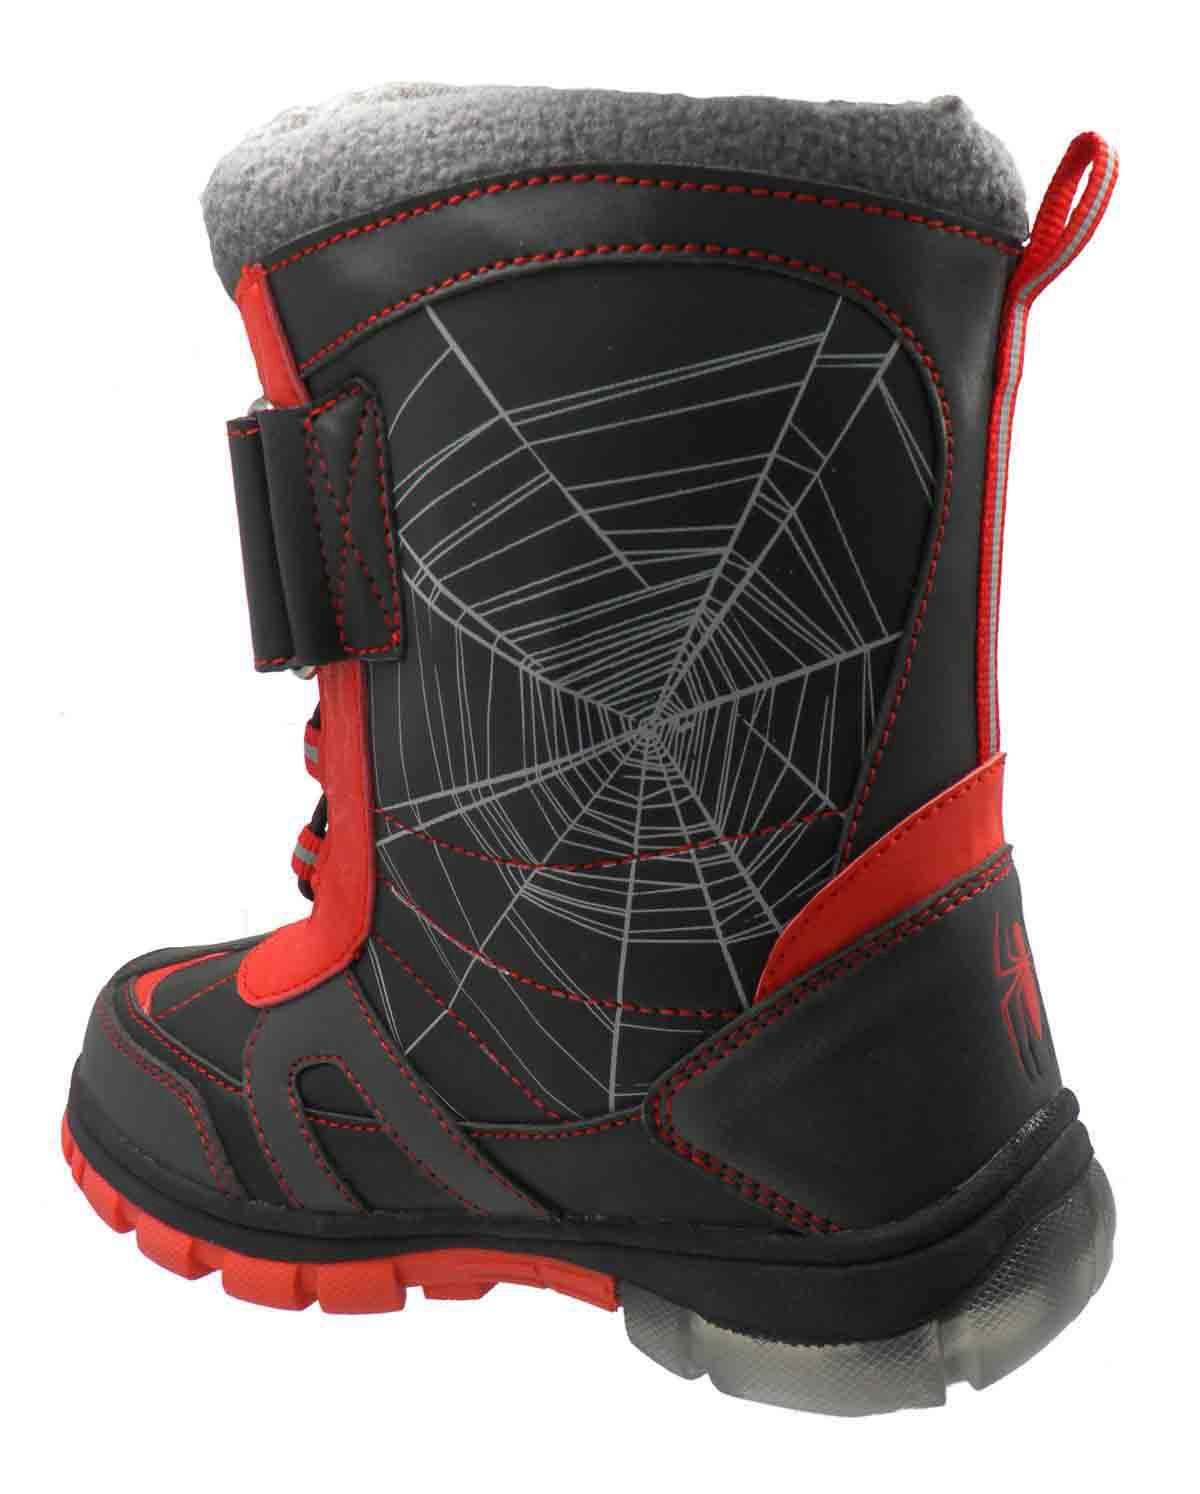 spiderman winter boots size 13